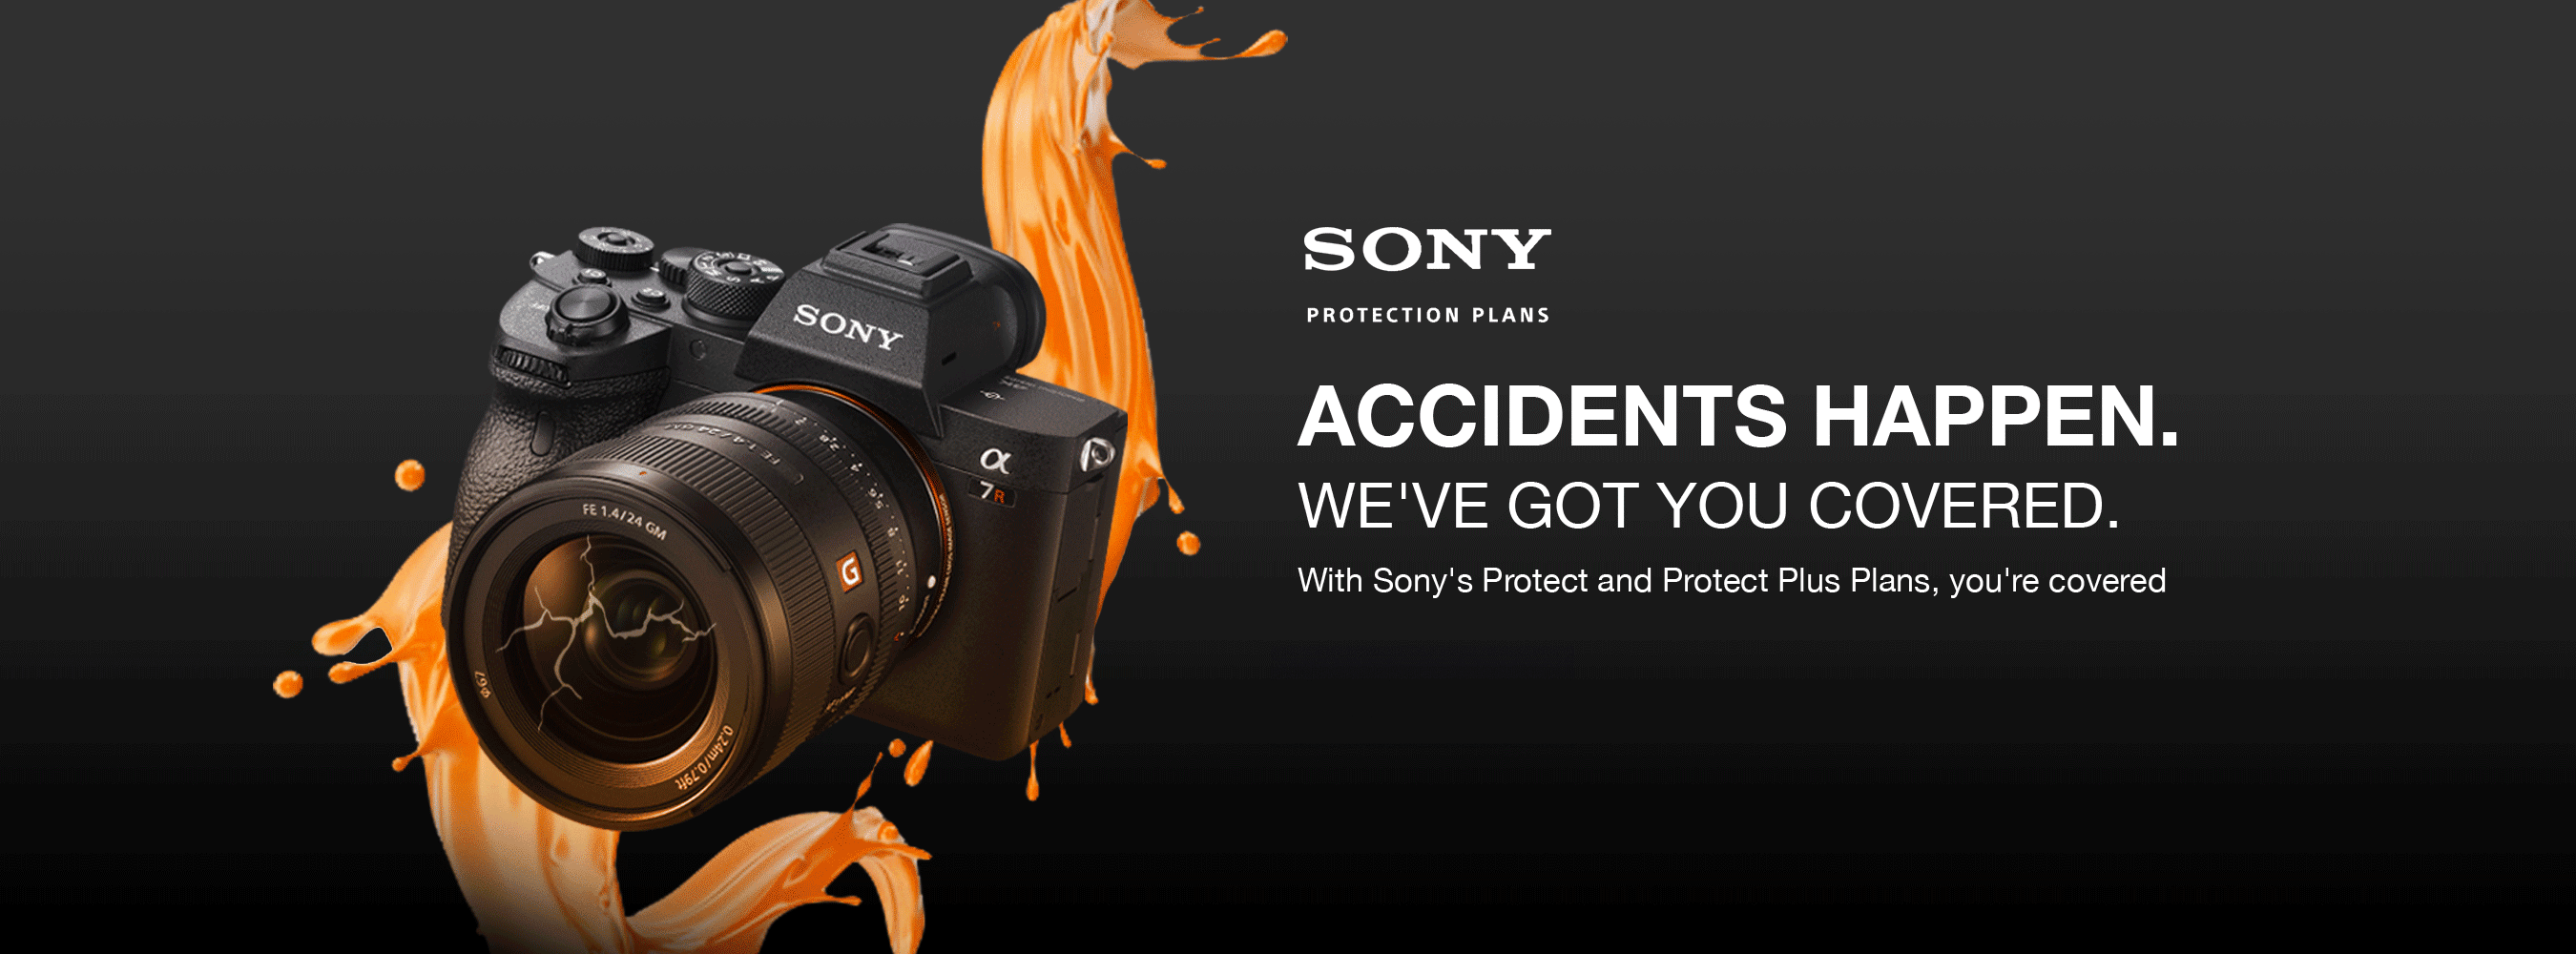 Sony Protection Plans